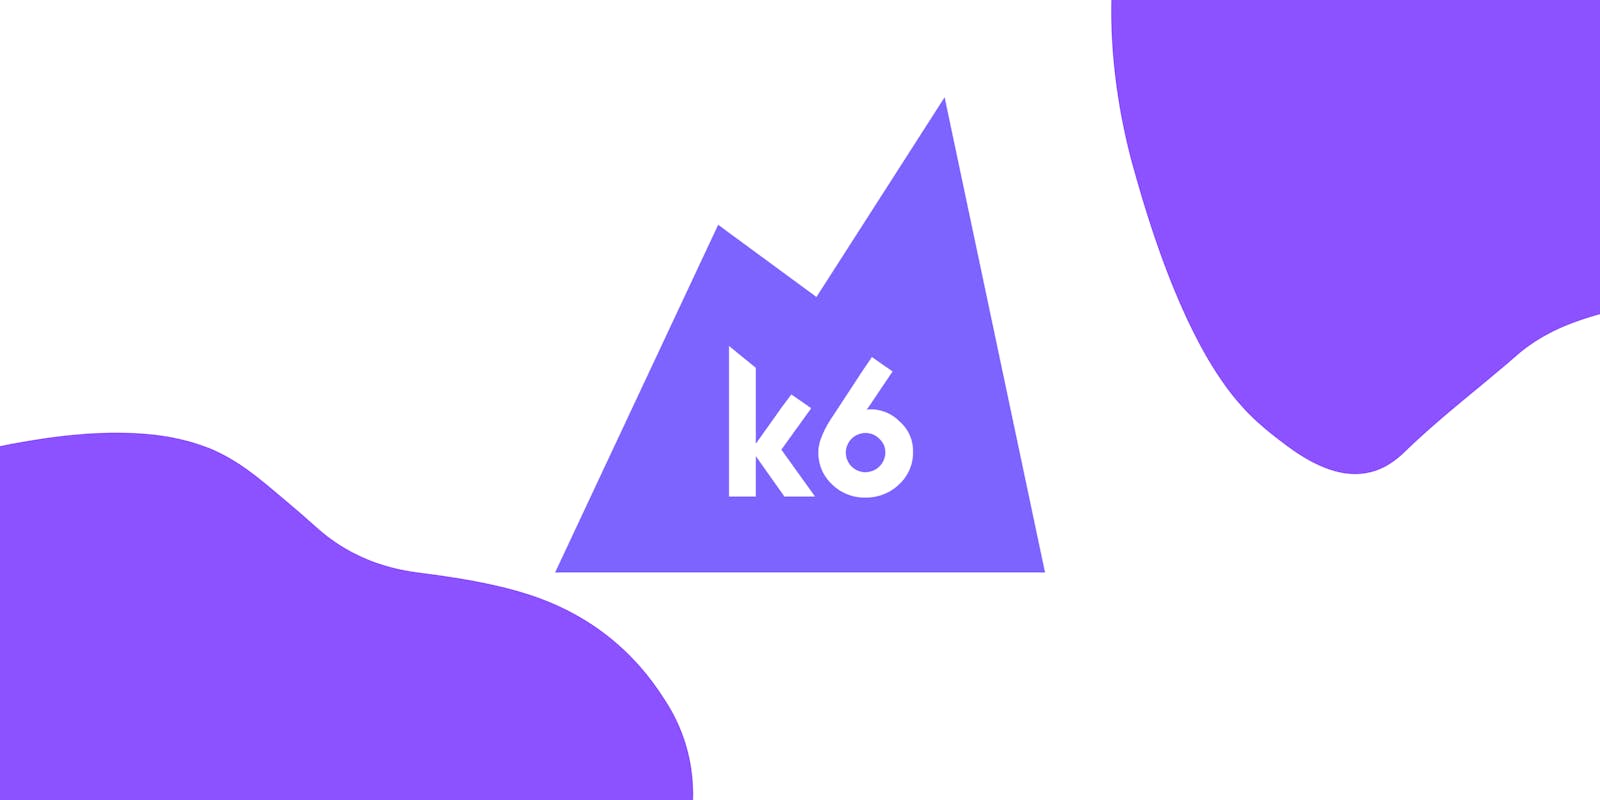 K6: The Load Testing Framework That’s Changing the Game